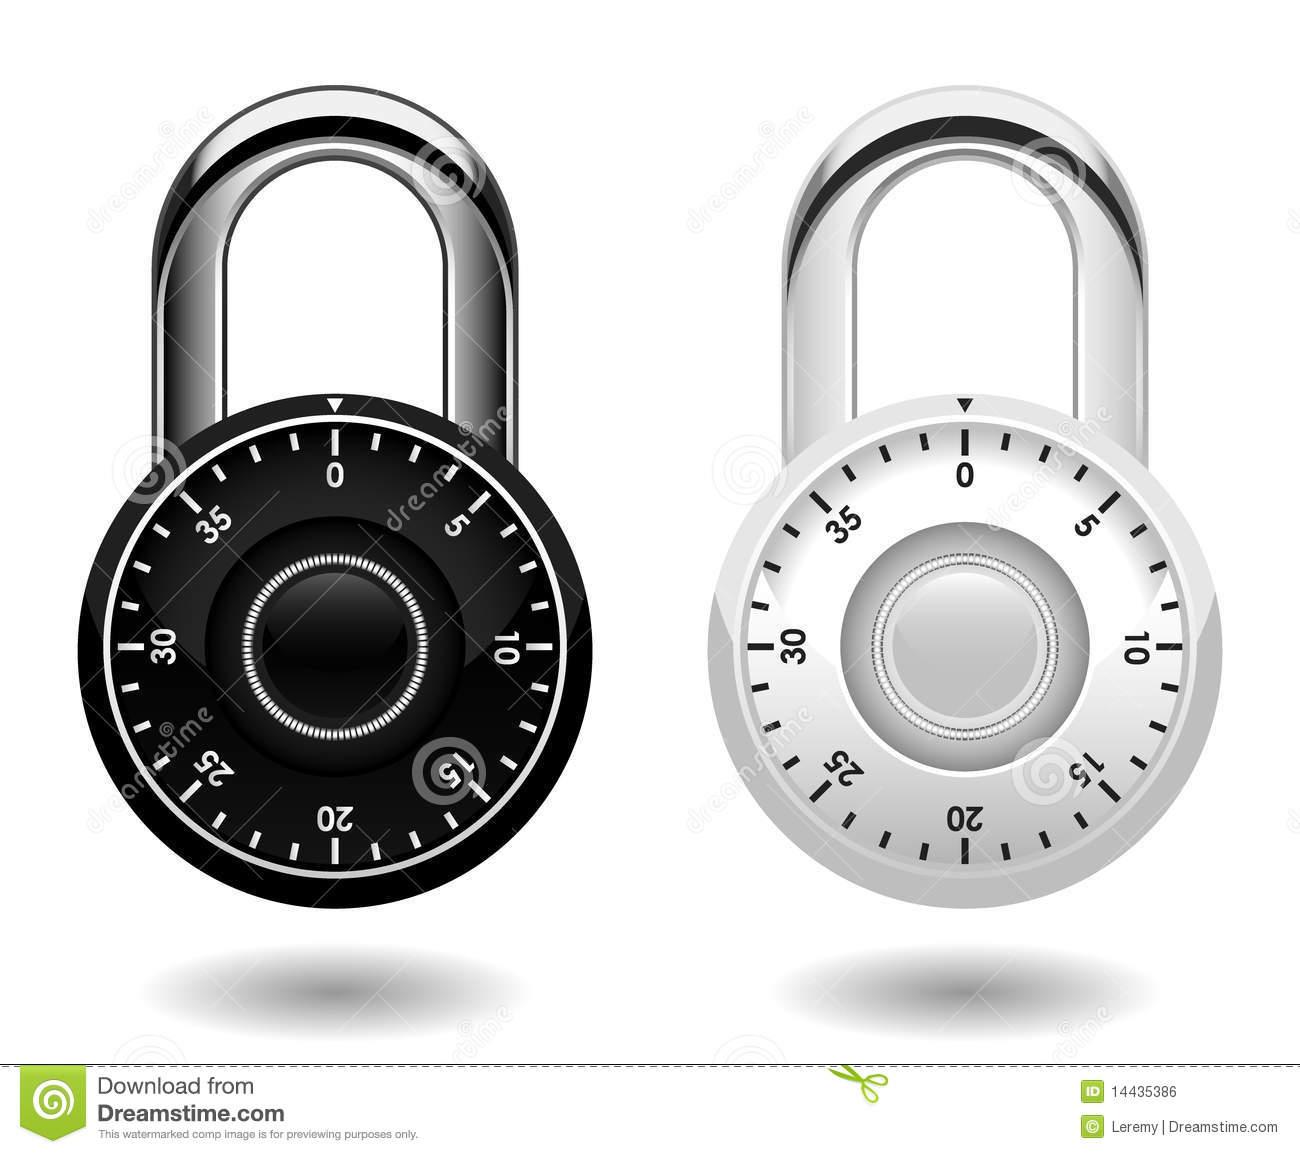 Security Combination Pad Lock Vector Royalty Free Stock Image   Image